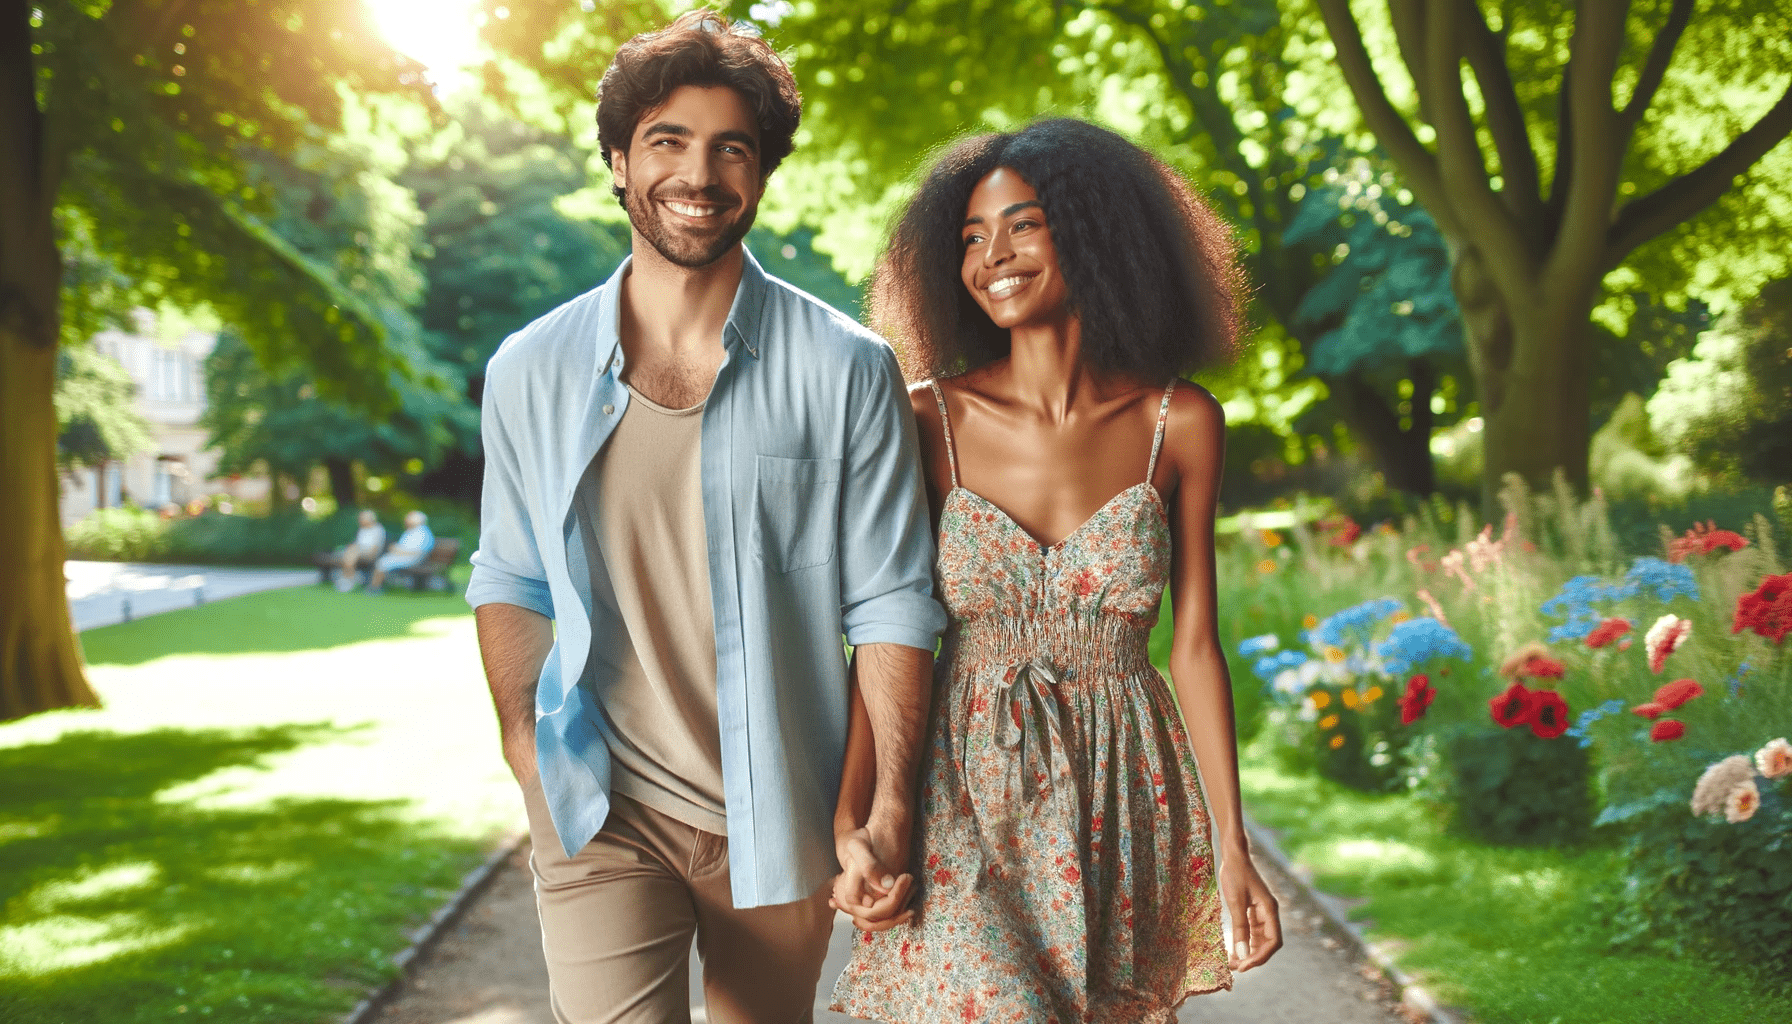 A cheerful couple in their 30s walking hand in hand through a beautiful park on a sunny day. The man of Middle Eastern descent is wearing a light bl